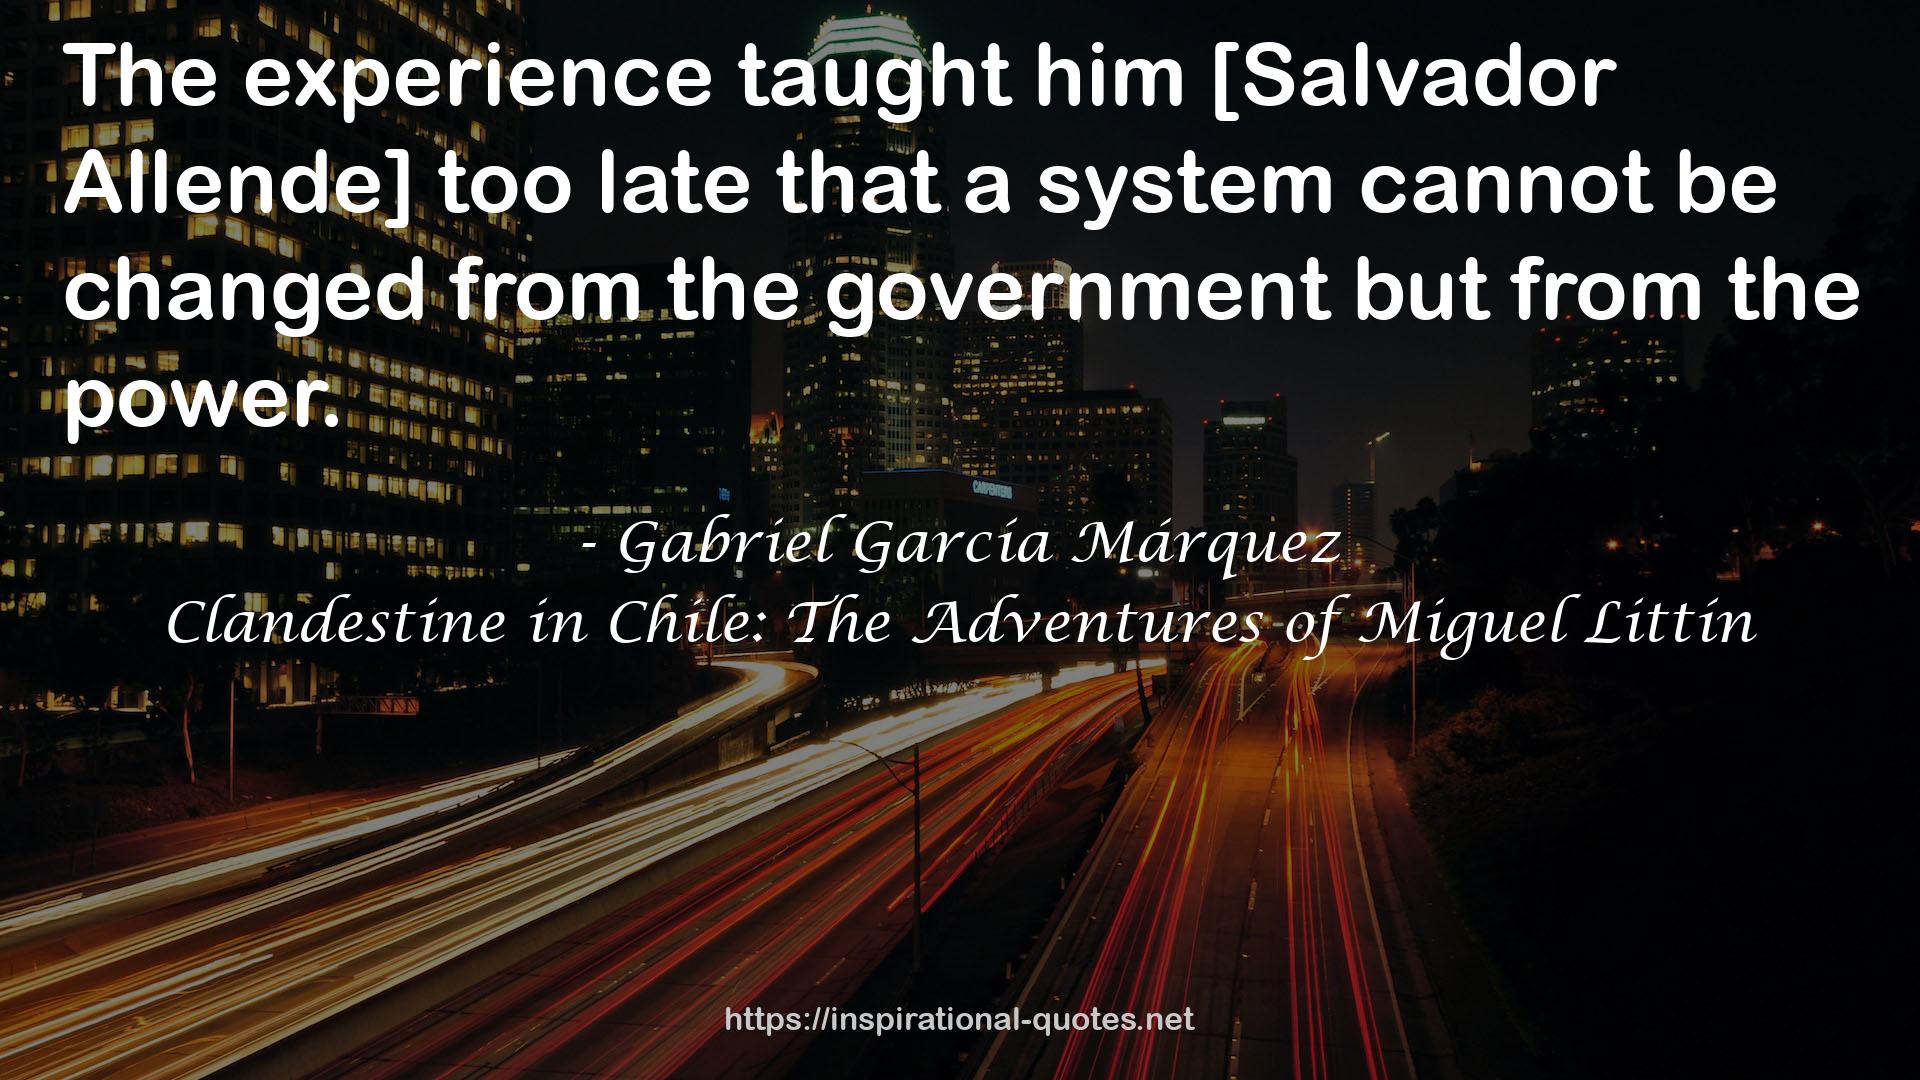 Clandestine in Chile: The Adventures of Miguel Littín QUOTES